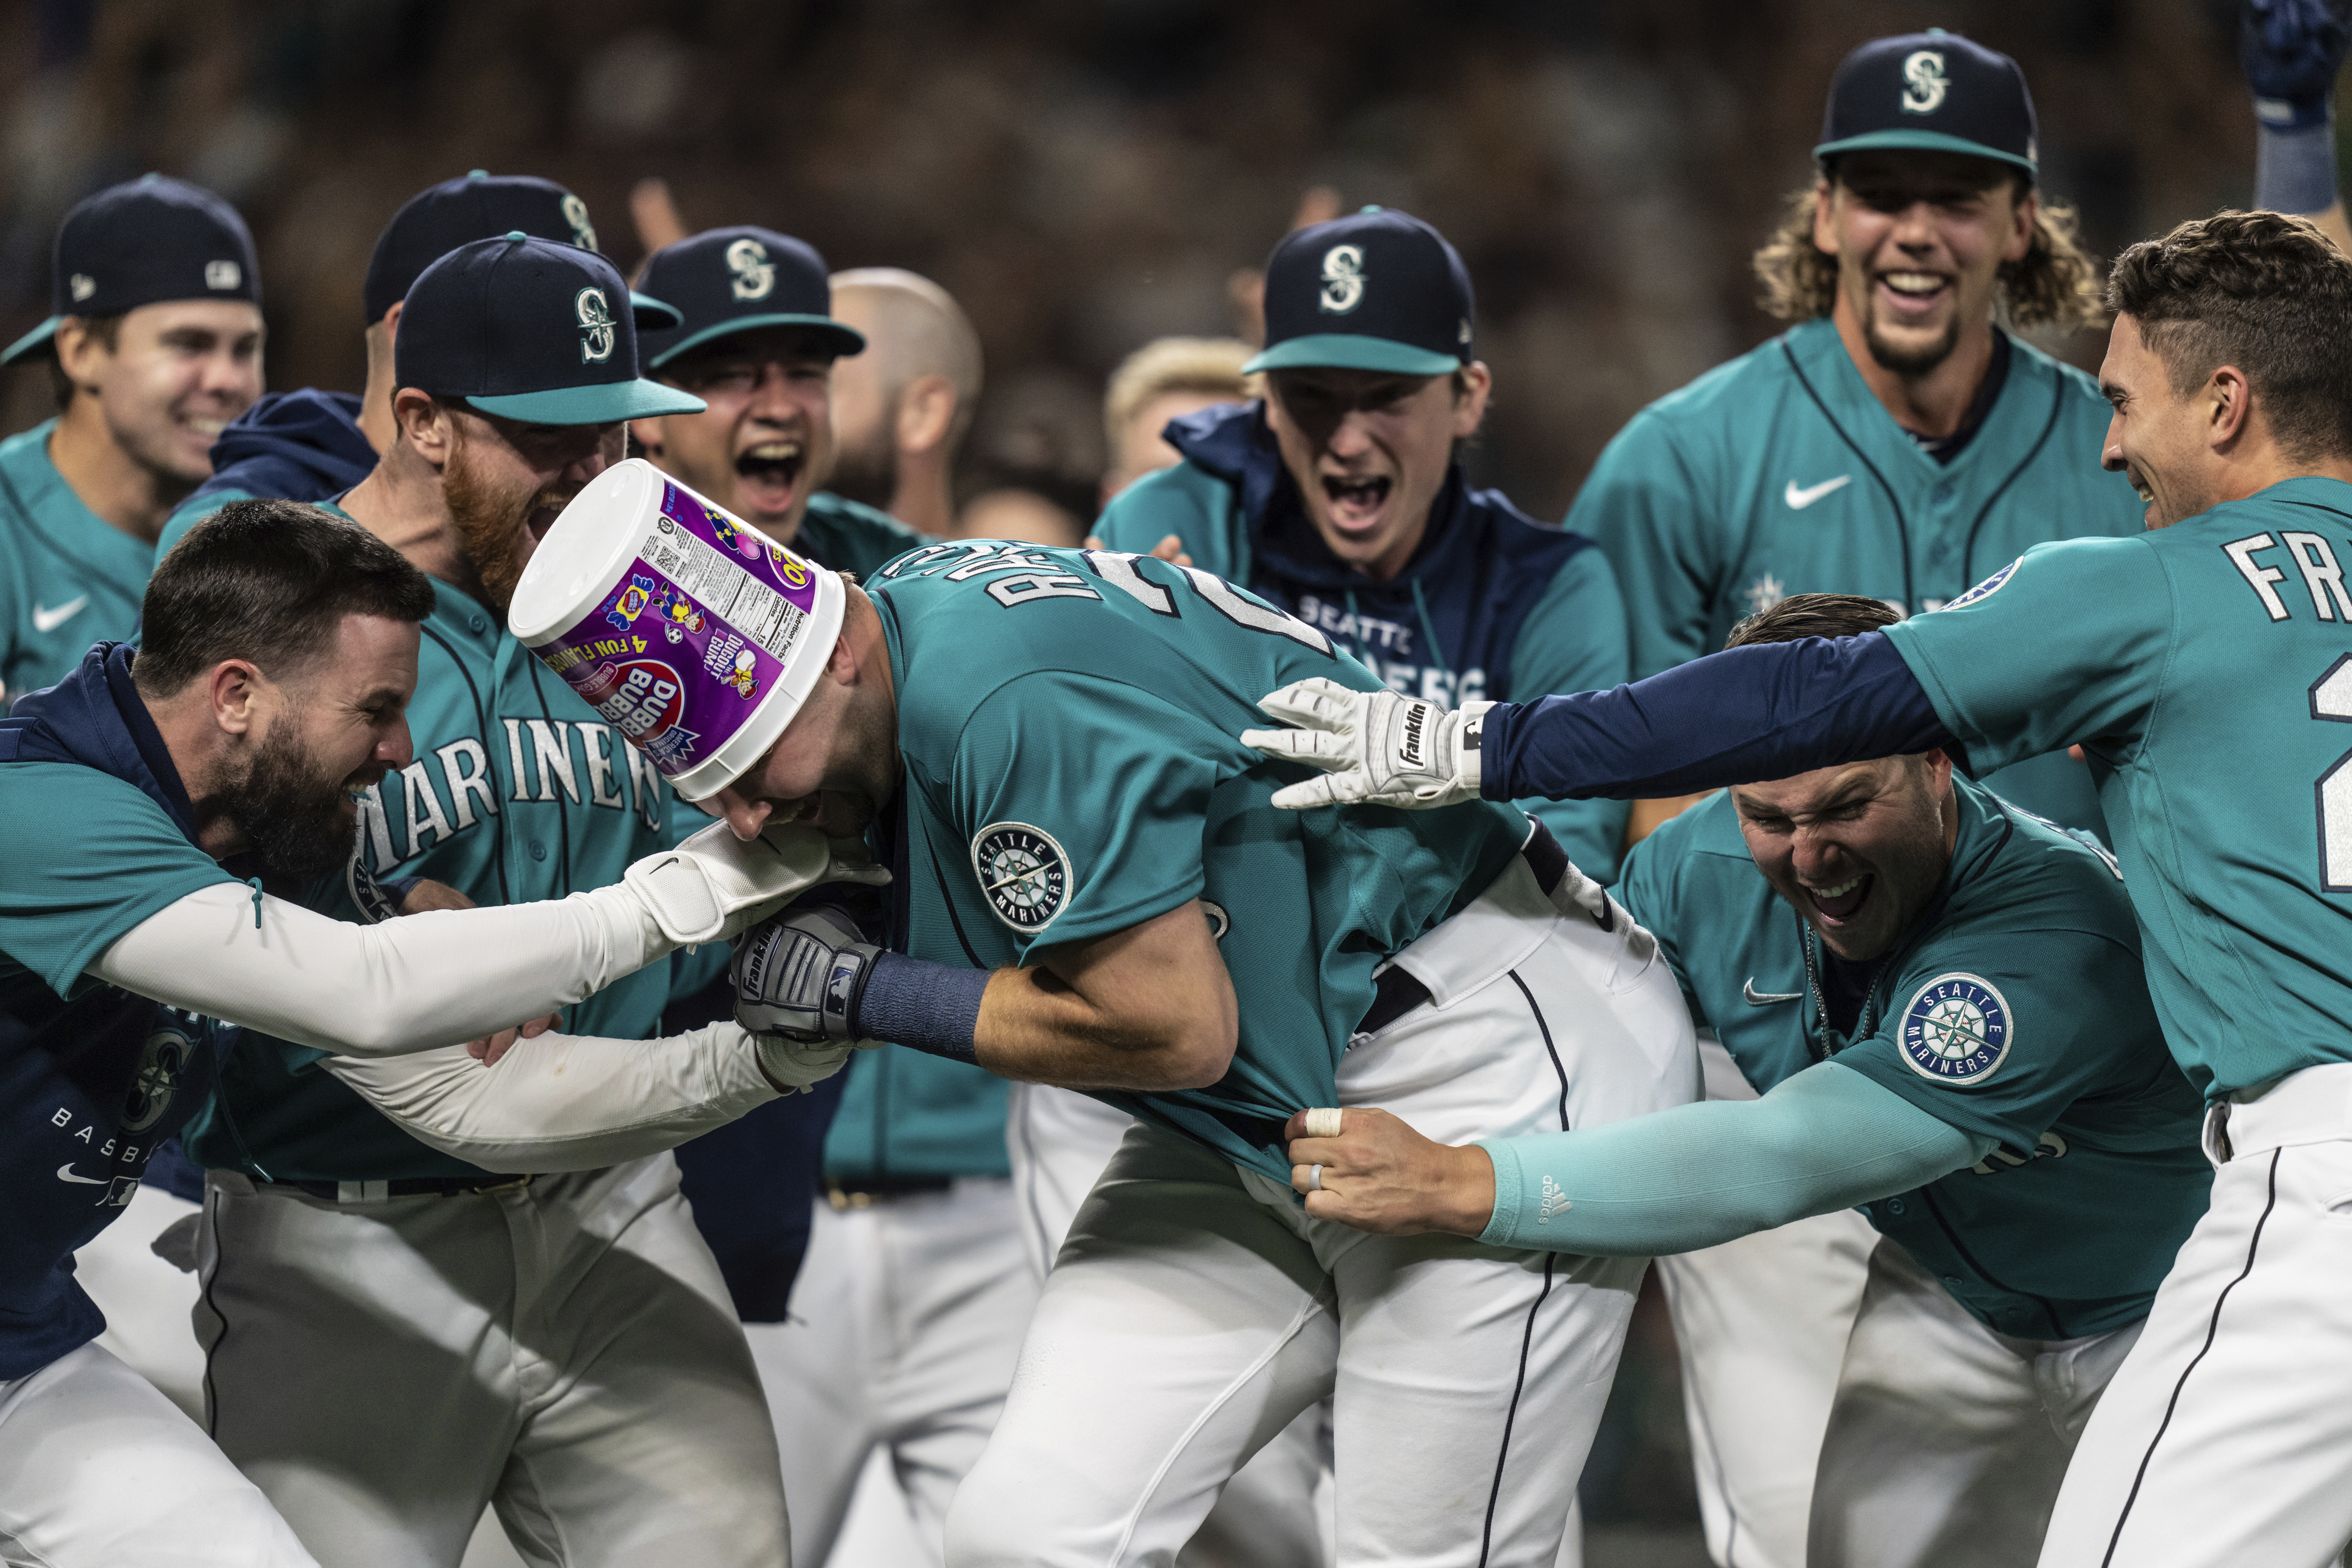 Mariners move into tie for first place in AL West after beating Royals